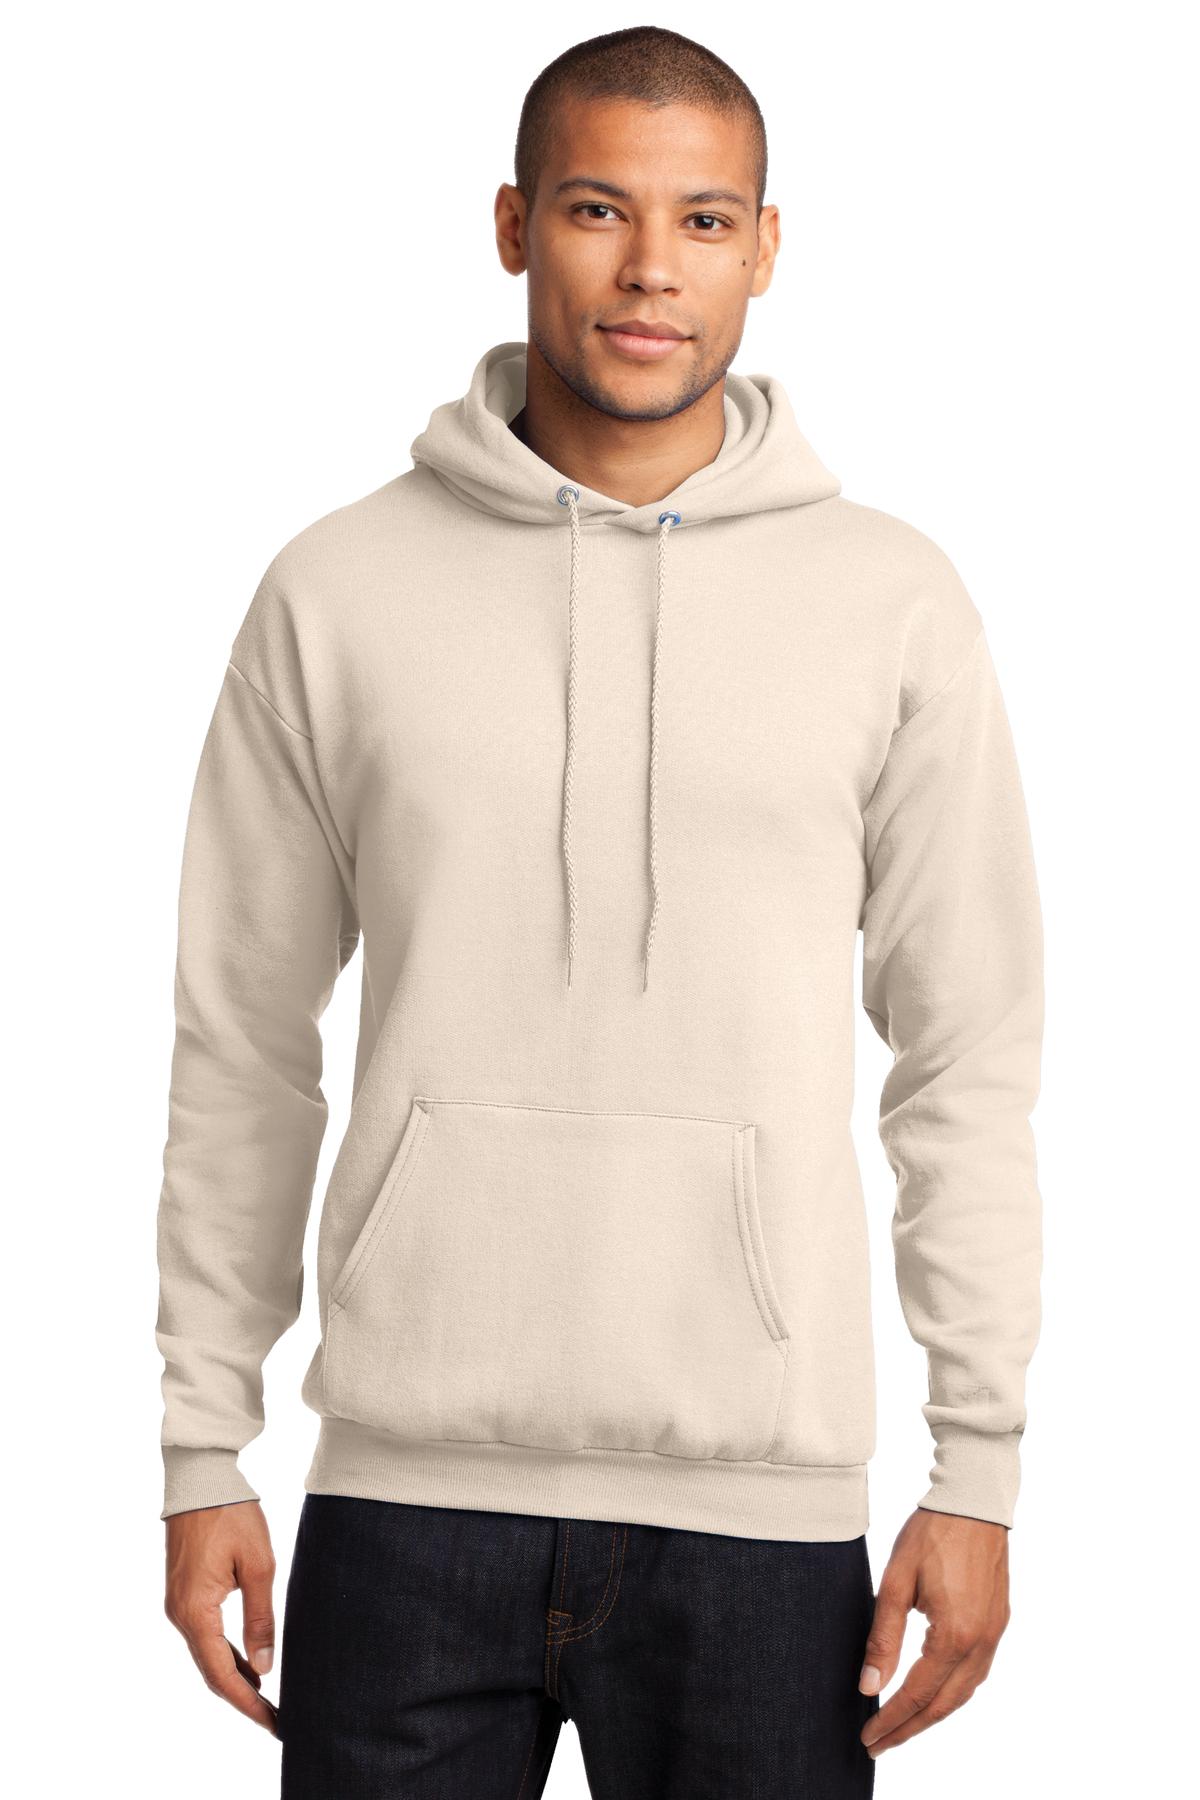 Port & Company® - Core Fleece Pullover Hooded Sweatshirt. PC78H [Natural] - DFW Impression